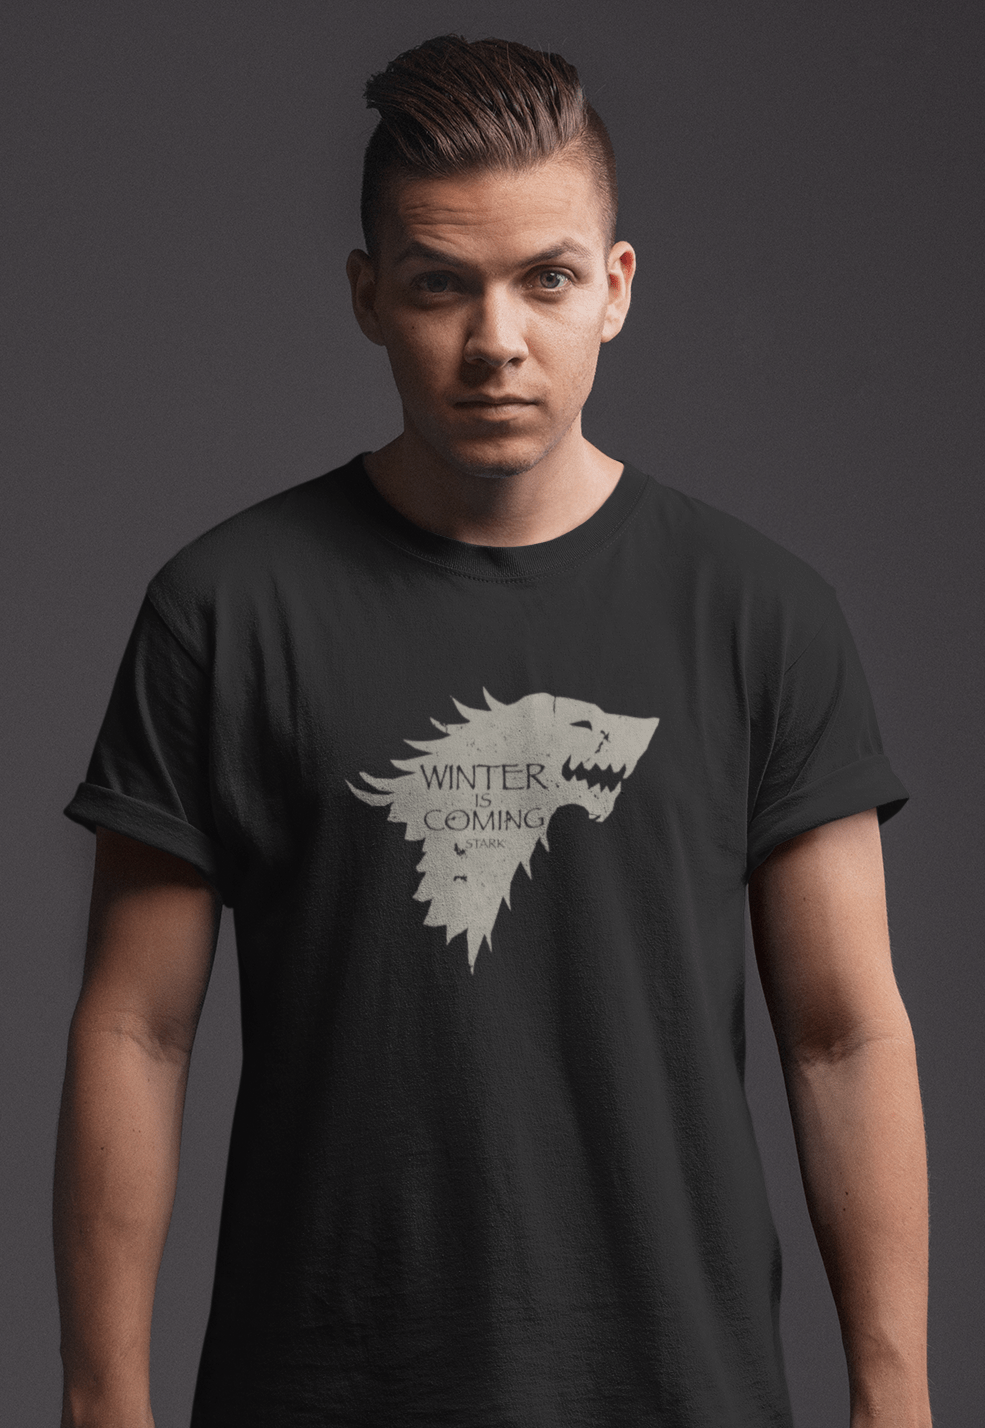 WINTER IS COMING -GAME OF THRONES" - HALF SLEEVE T-SHIRTS BLACK